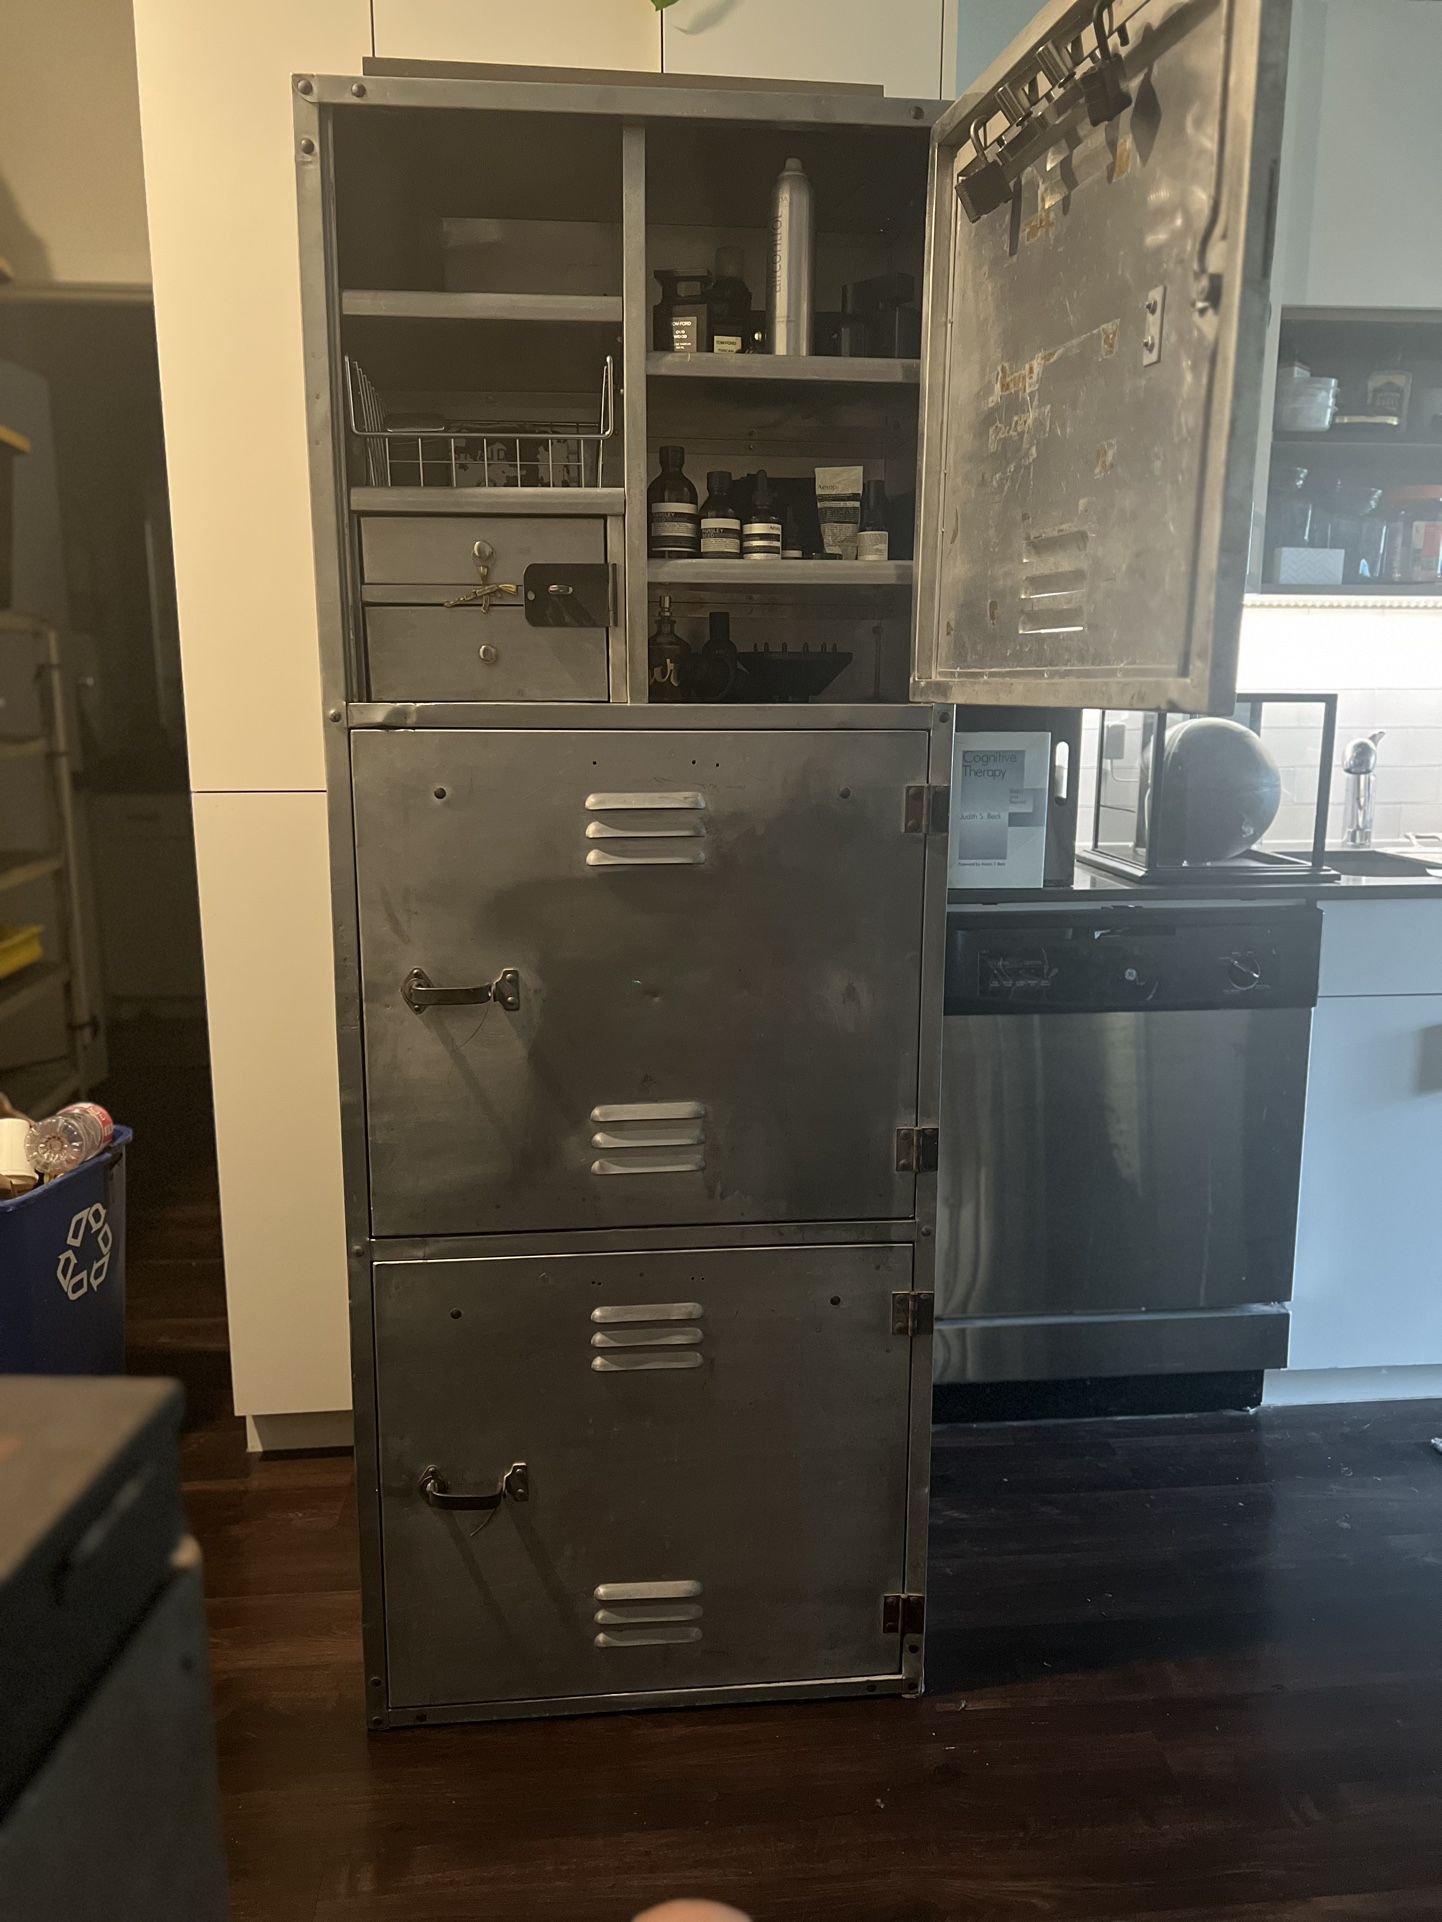 Excellent Condition 3 Compartment metal naval Lockers W/compartmental Organized Shelving And Locking Drawers